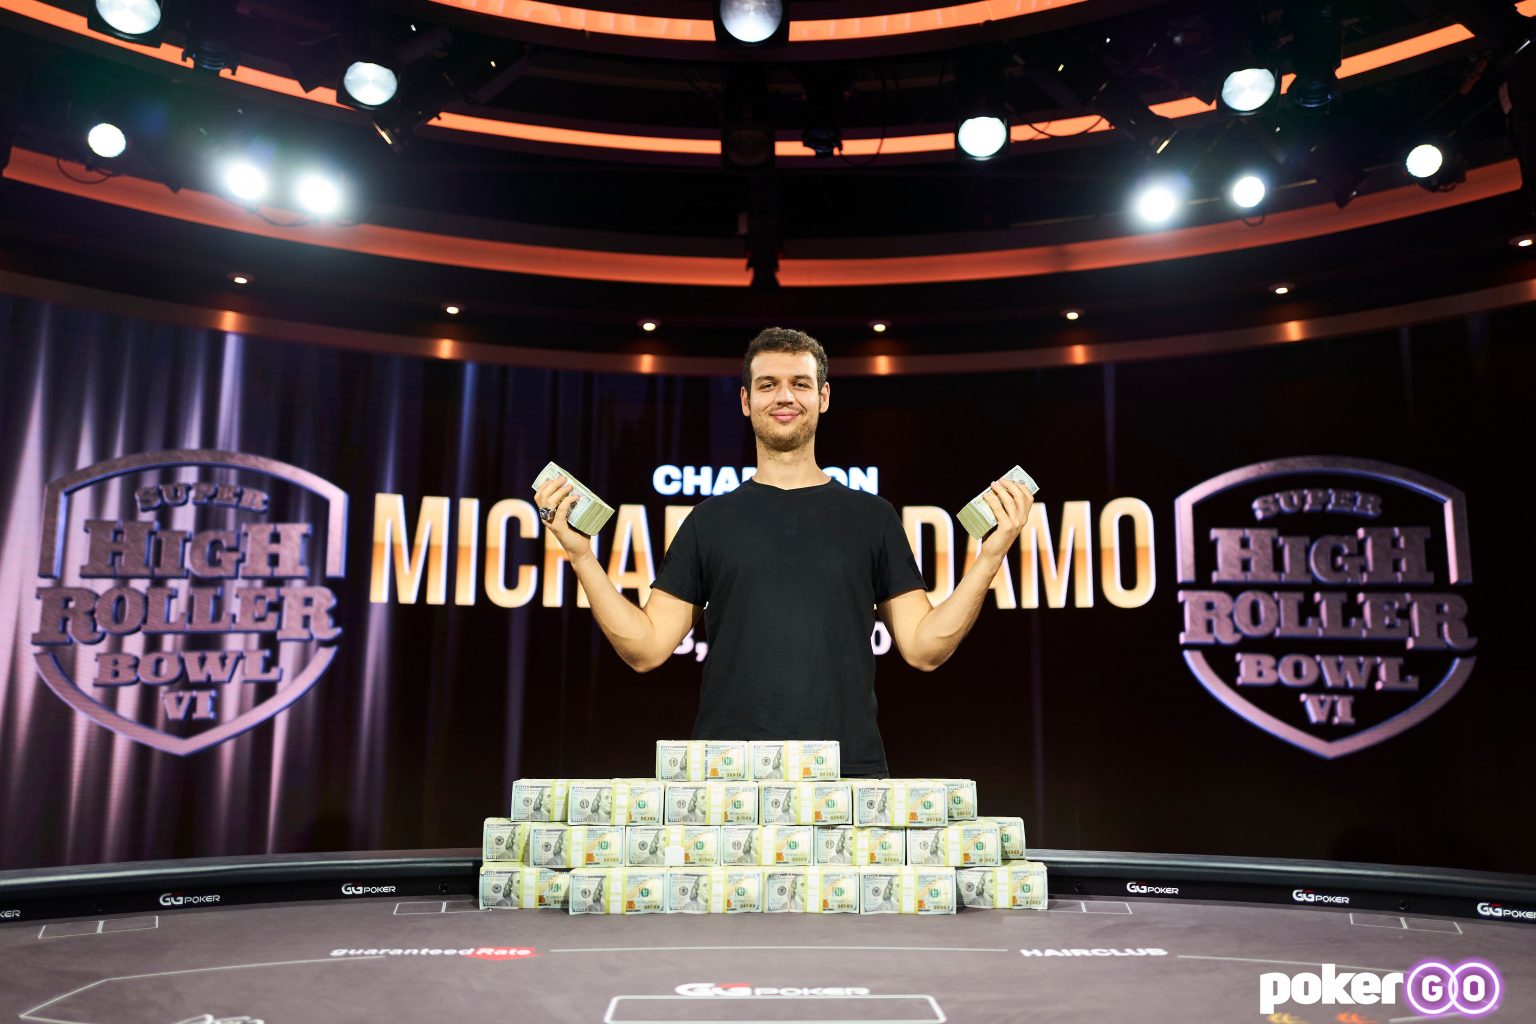 Michael Addamo on His Super High Roller Bowl Victory, His Ridiculous Run, and More